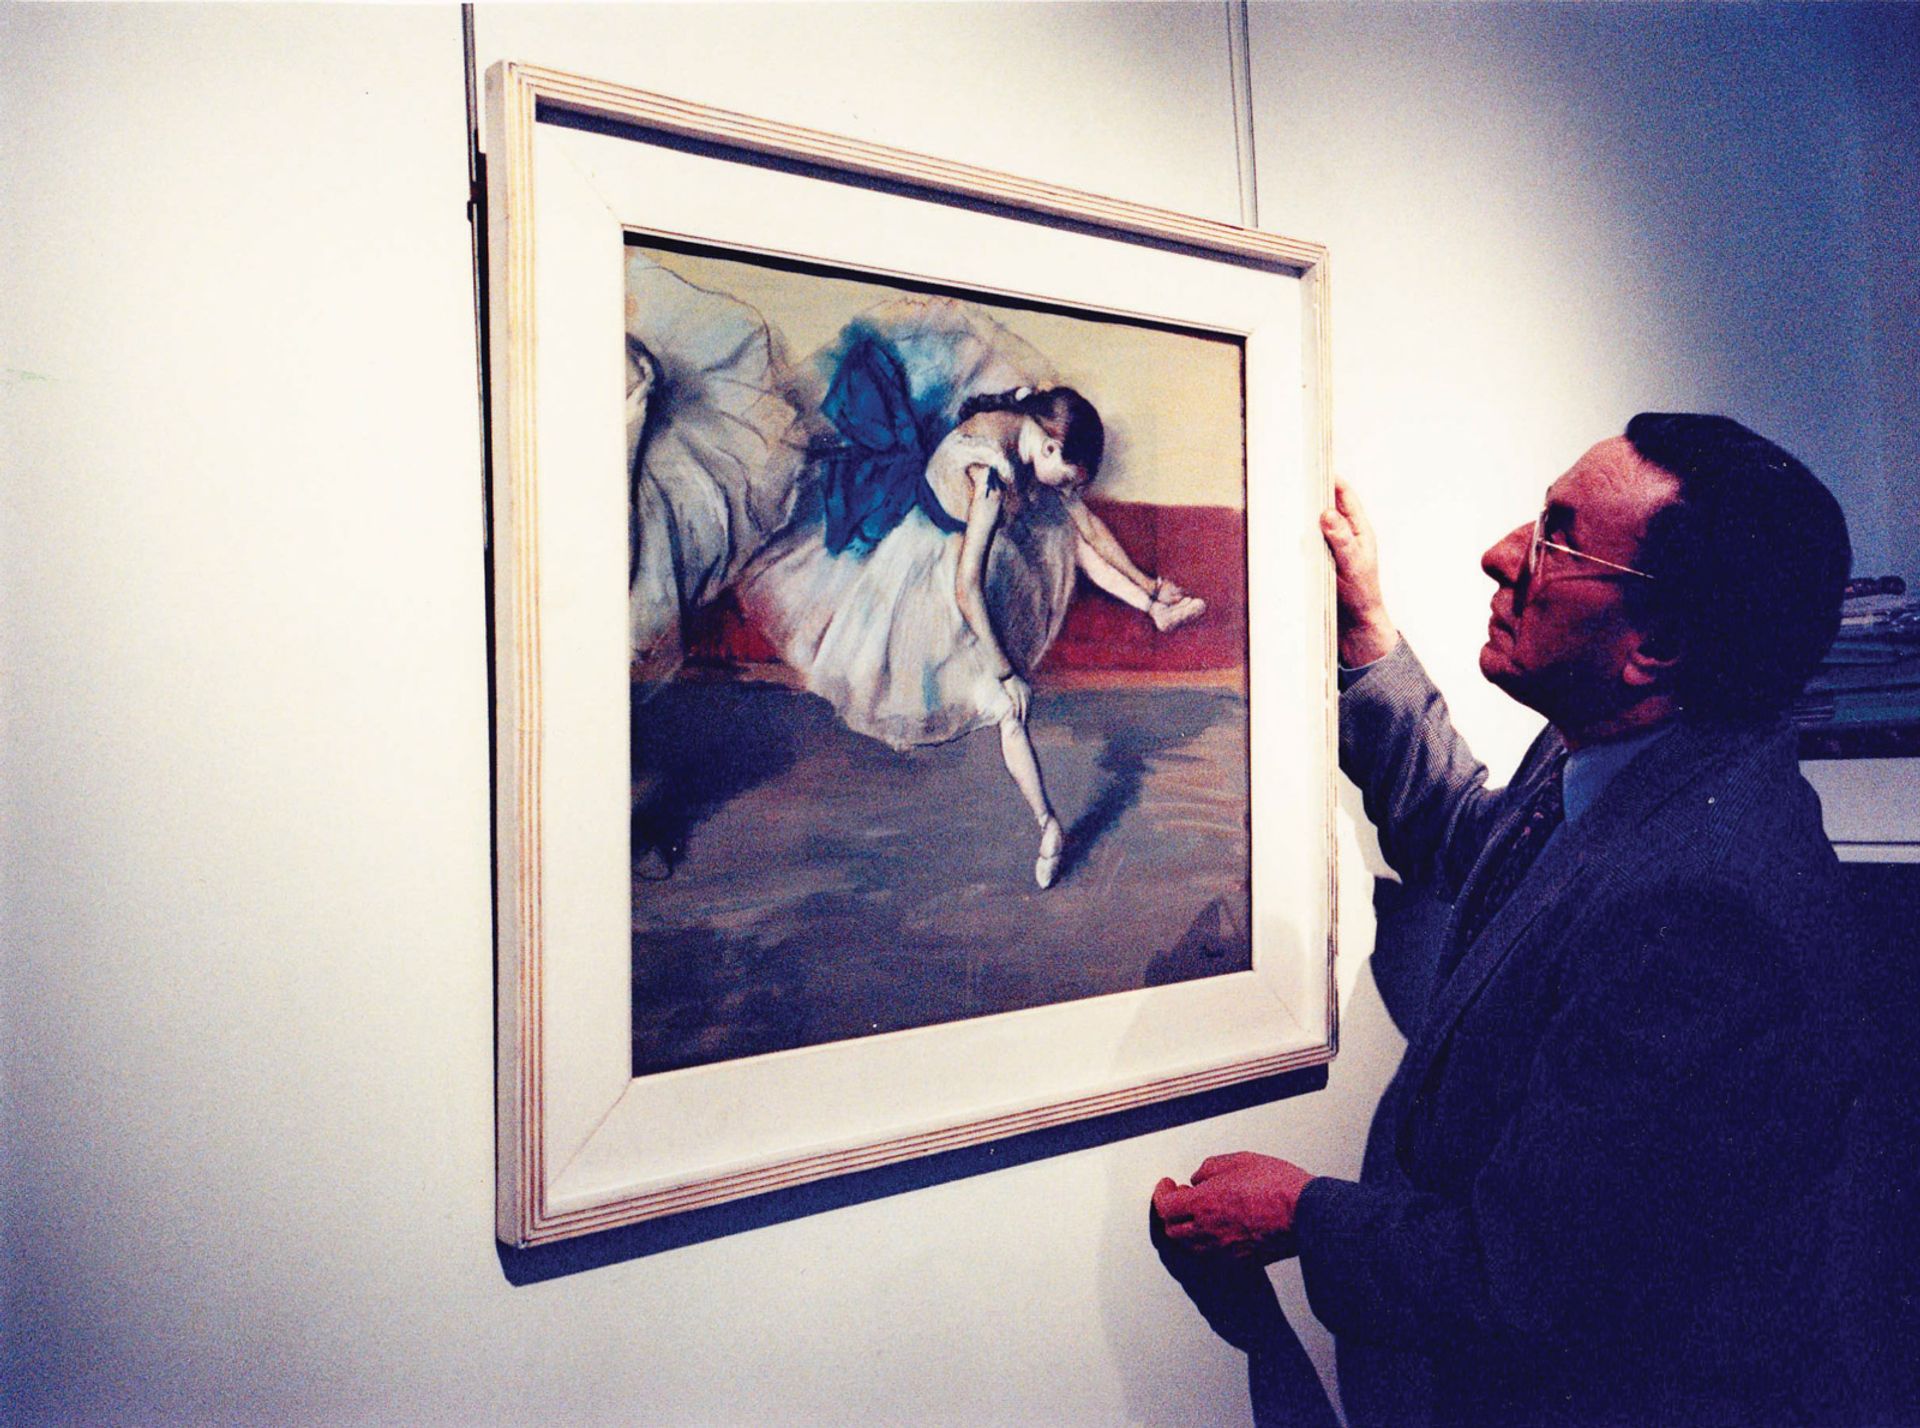 Michel Strauss viewing Degas’s Danseuse au Repos (1879) when it sold at Sotheby’s in London in 1999; the work is in its original ‘Impressionist’ frame, considered the height of modernity at the time Courtesy of Sotheby’s and Halban Publishers